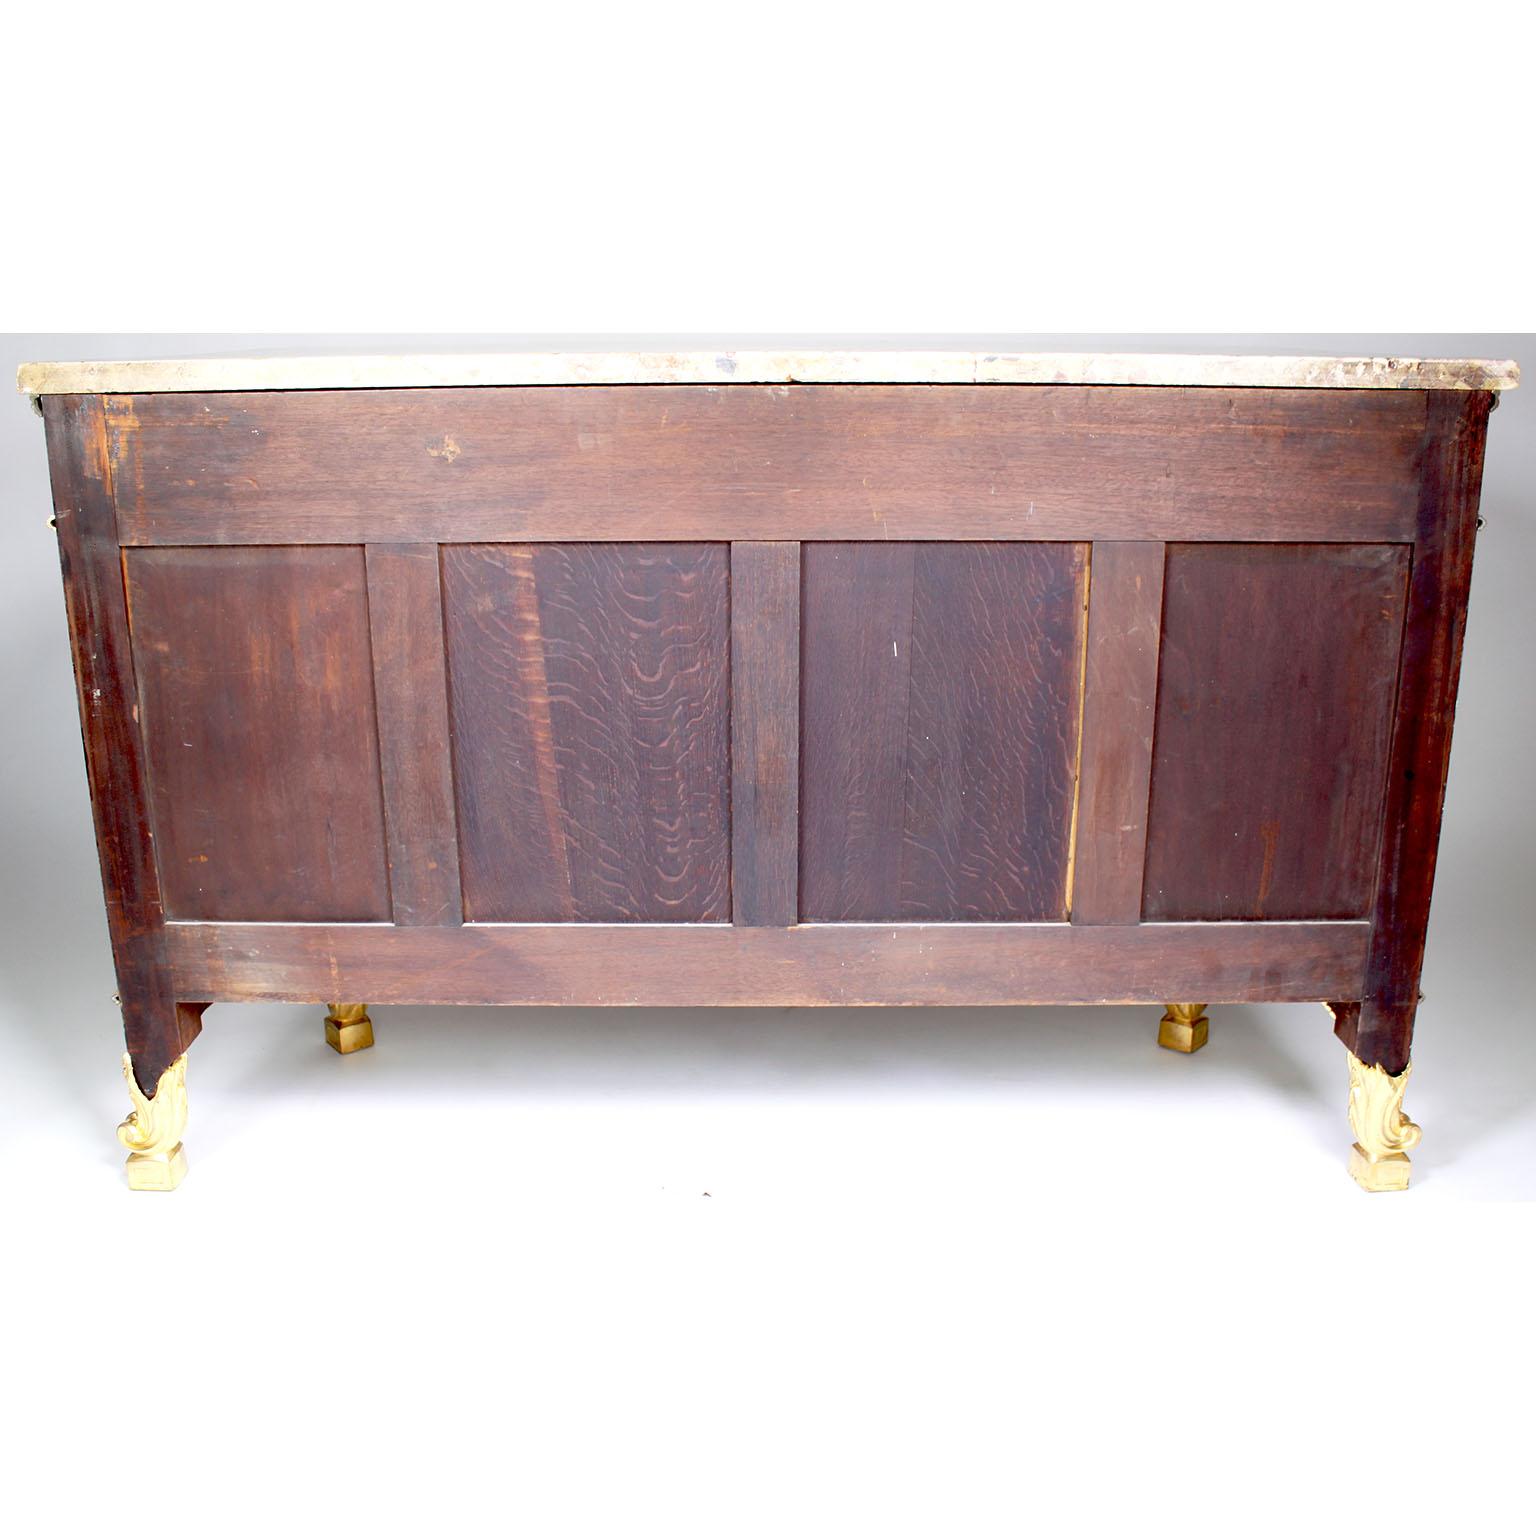 French 19th Century Louis XV-XVI Ormolu Mounted Marquetry Commode Marble Top For Sale 14